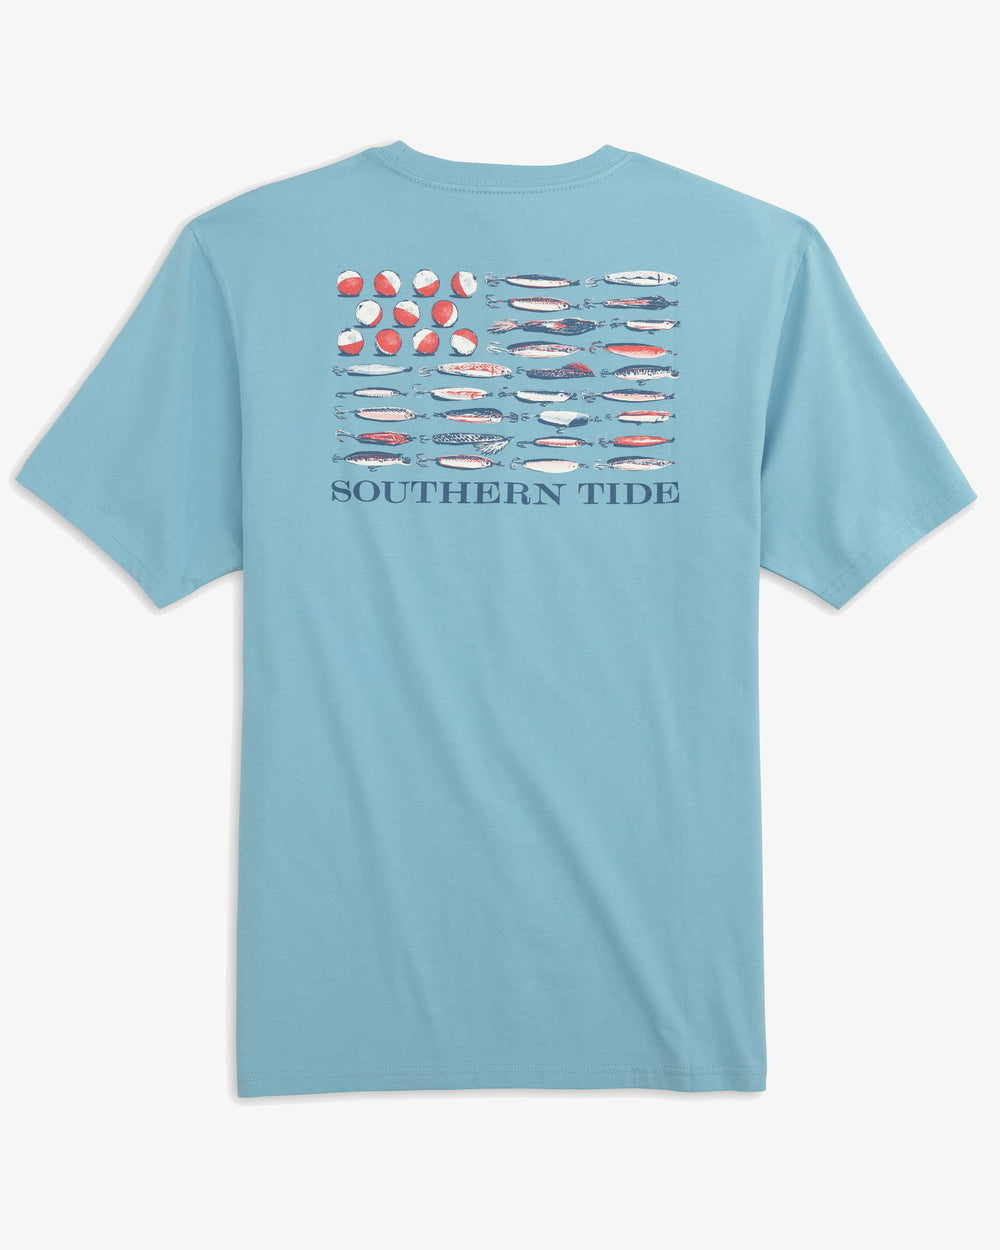 The back view of the Men's Bobbers and Lures Tide T-Shirt by Southern Tide - Brisk Blue